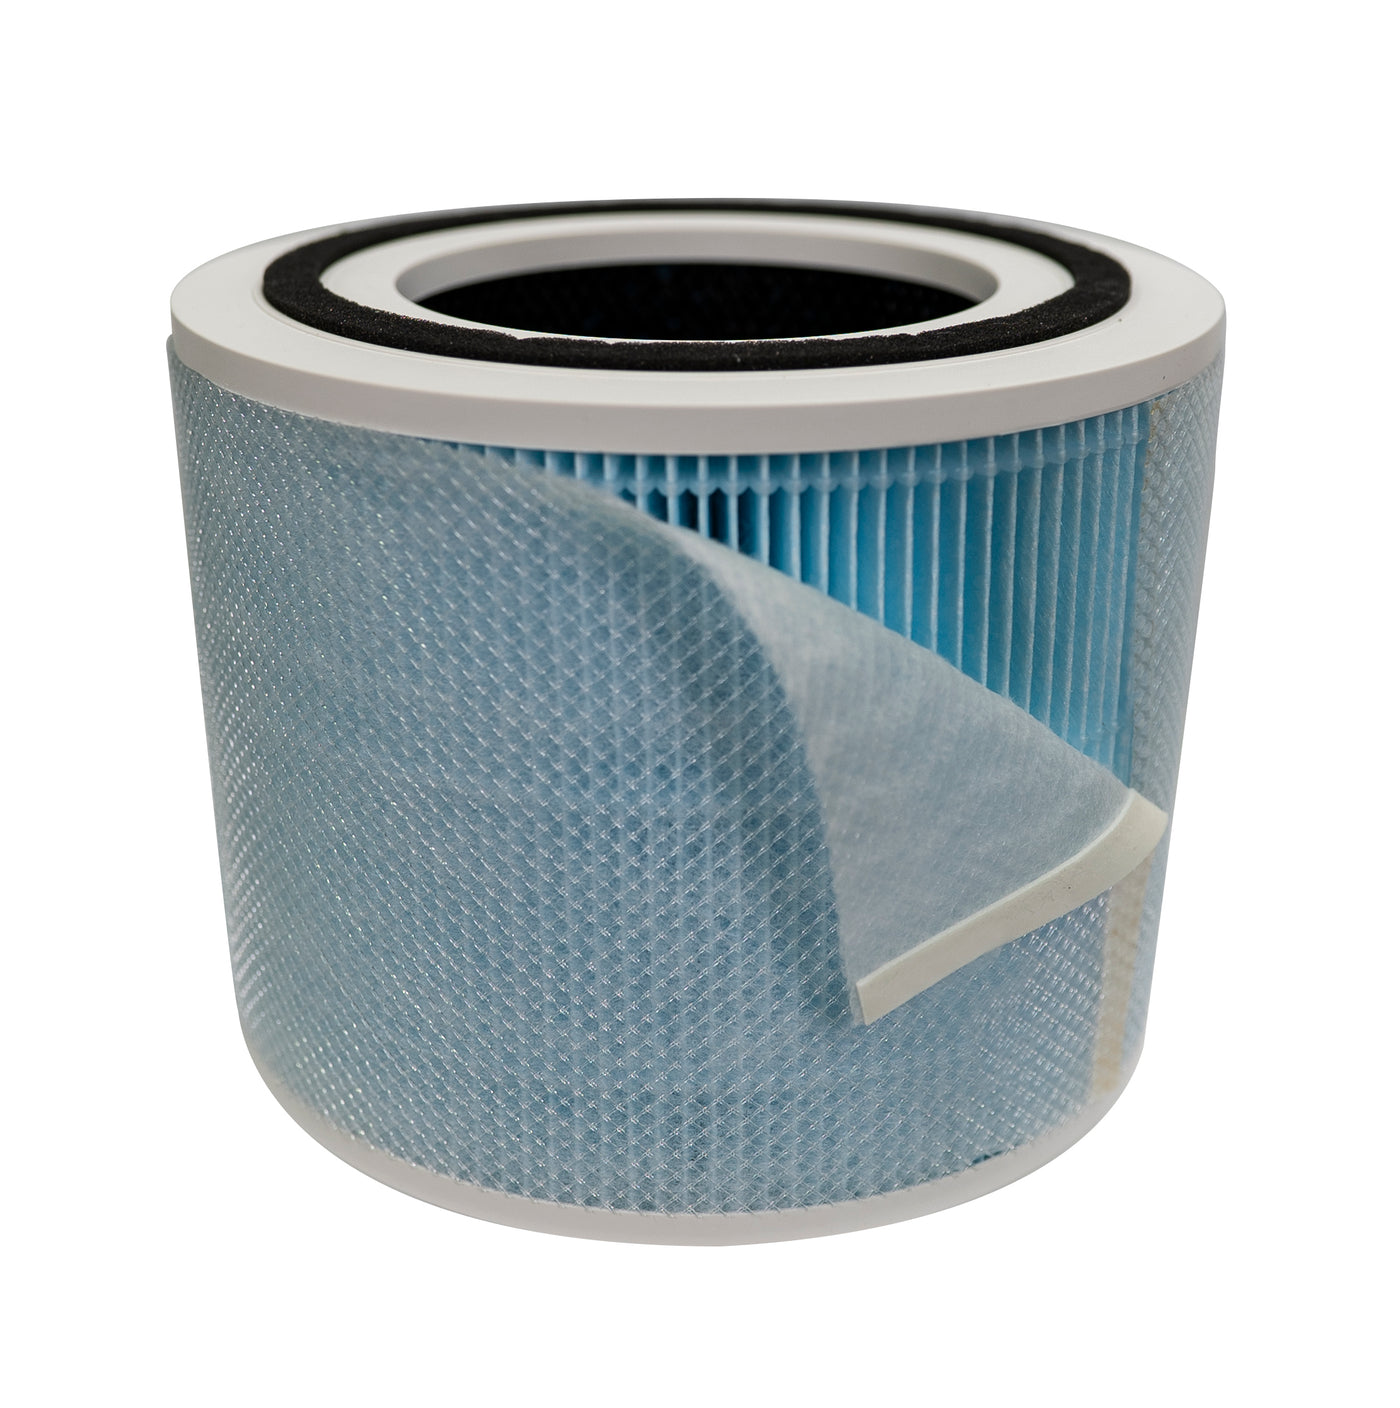 Filter Replacement For Levoit -pur131 Air Purifier For 4 Hepa